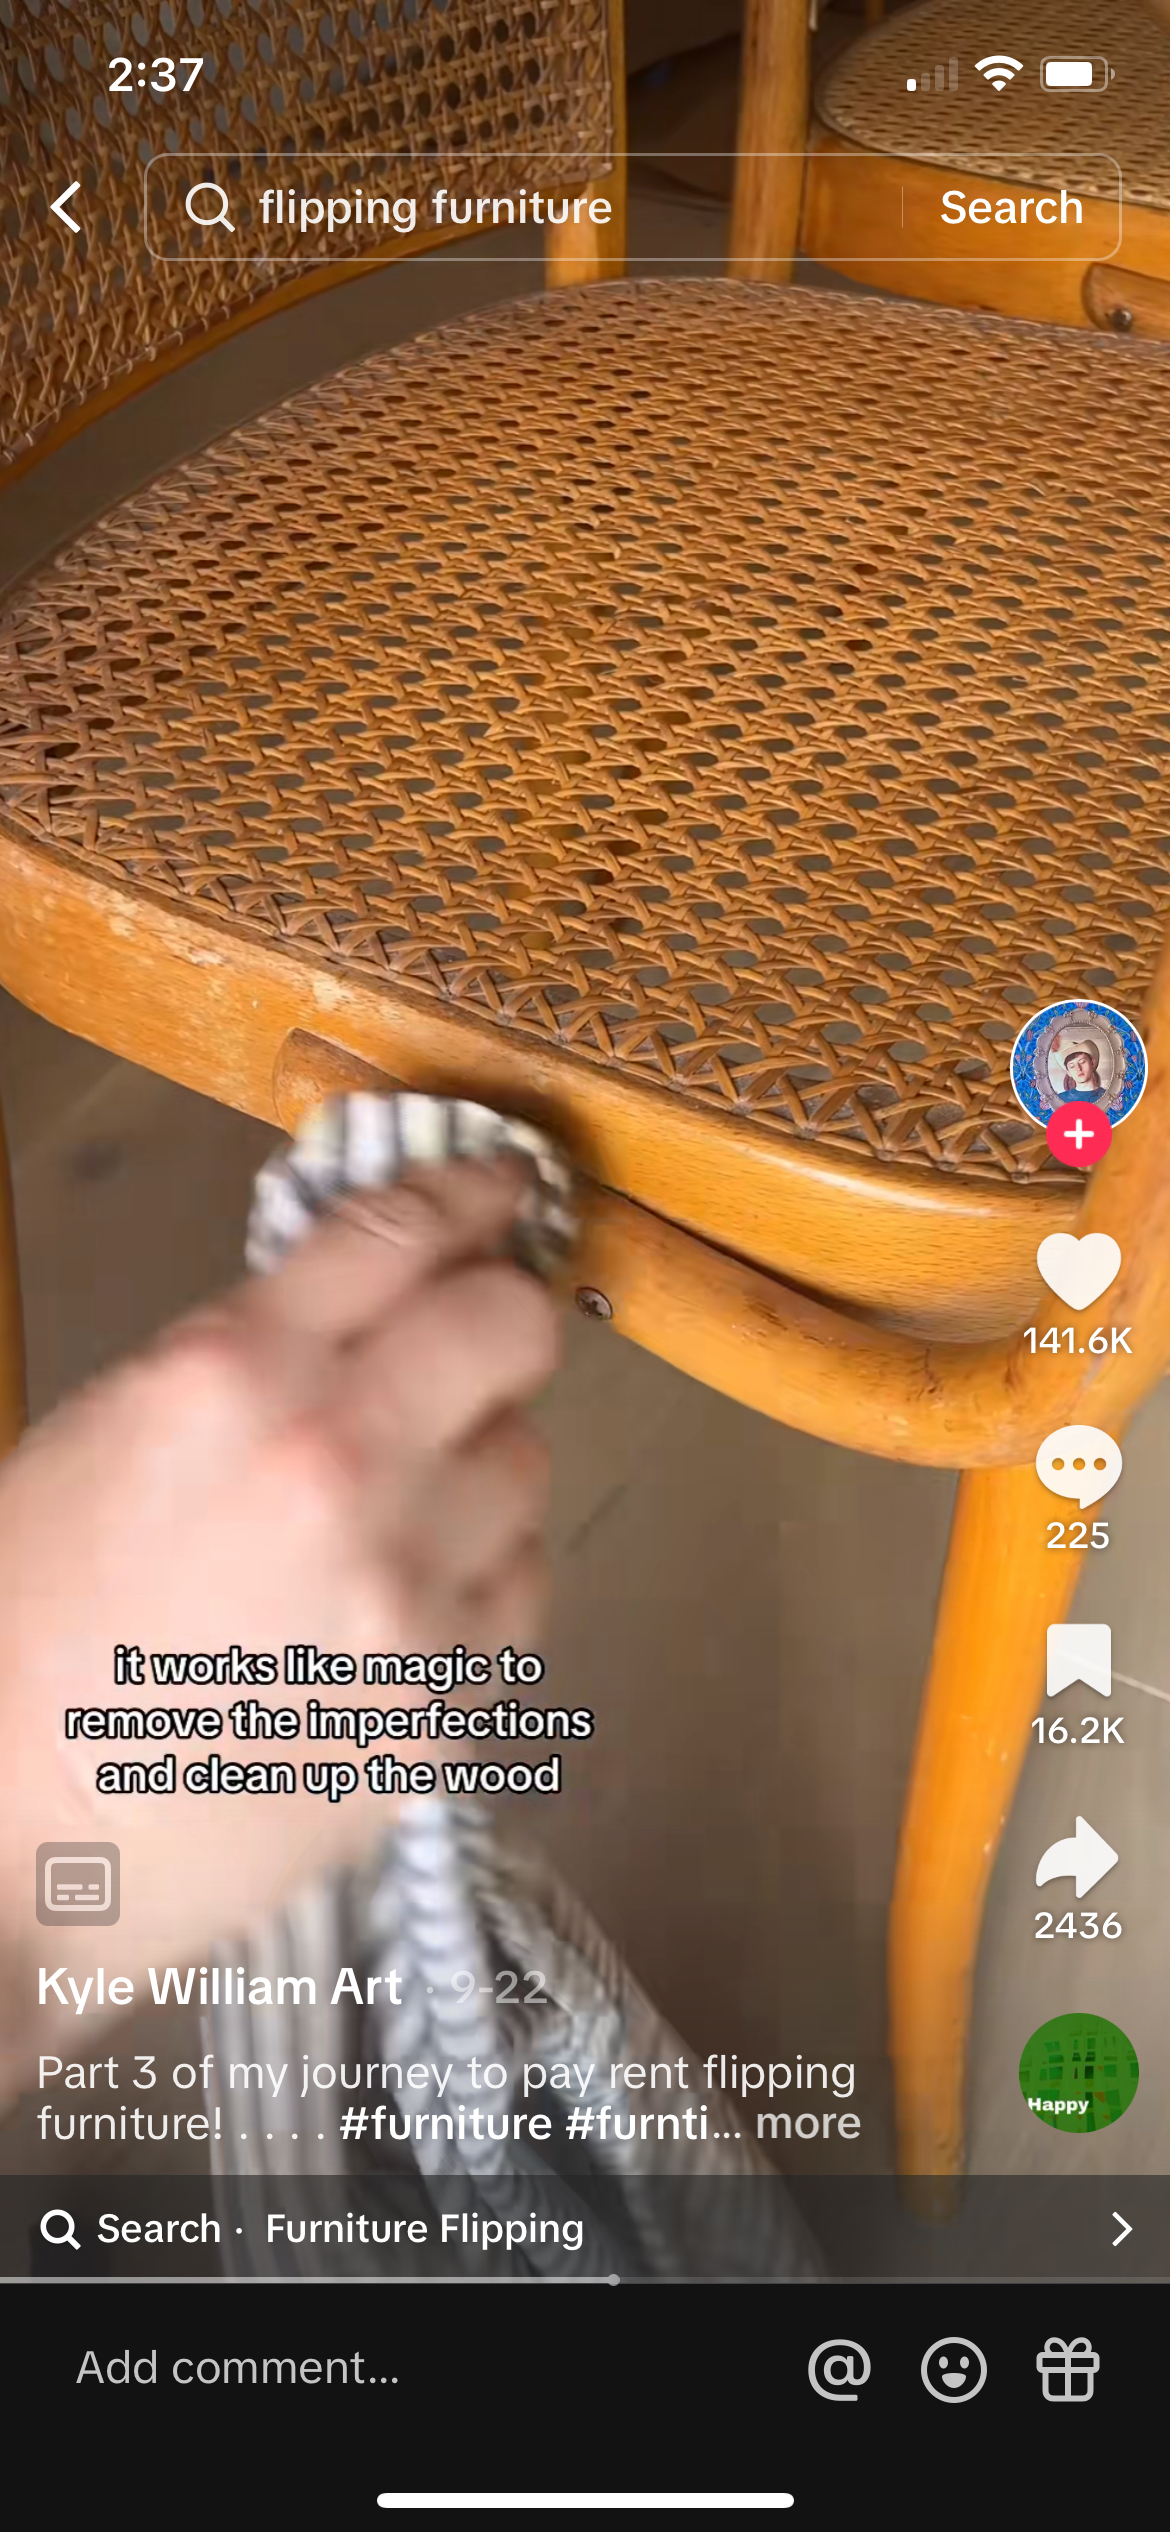 it works like magic to remove imperfections and clean up the wood